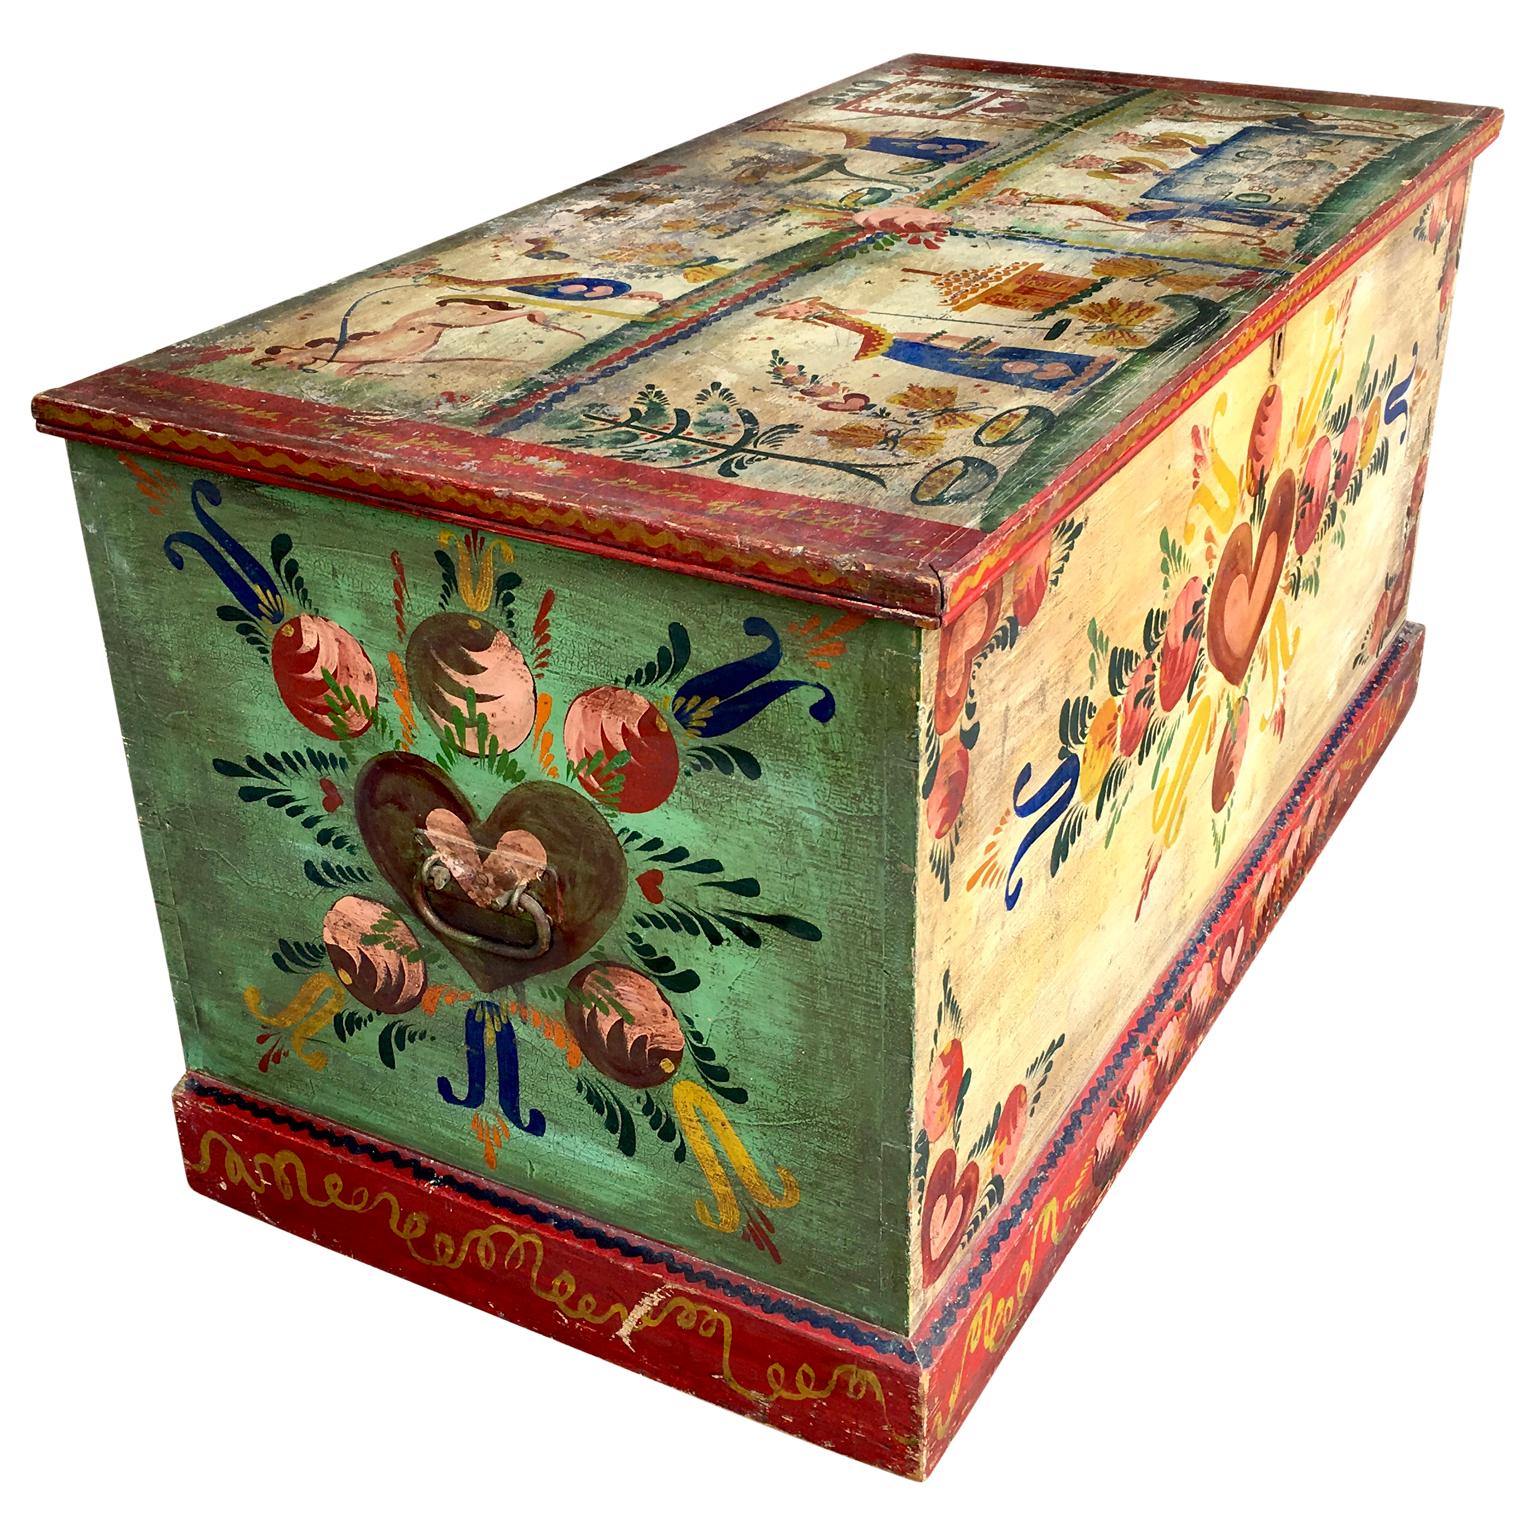 Large rare Peter Hunt hand painted Folk Art chest signed and dated 1944

A rare Folk Art hand painted large chest by Peter Hunt (1896-1967). Noted Cape Cod artist. Whimsical style in wonderful colors. He would take antique pieces of furniture and